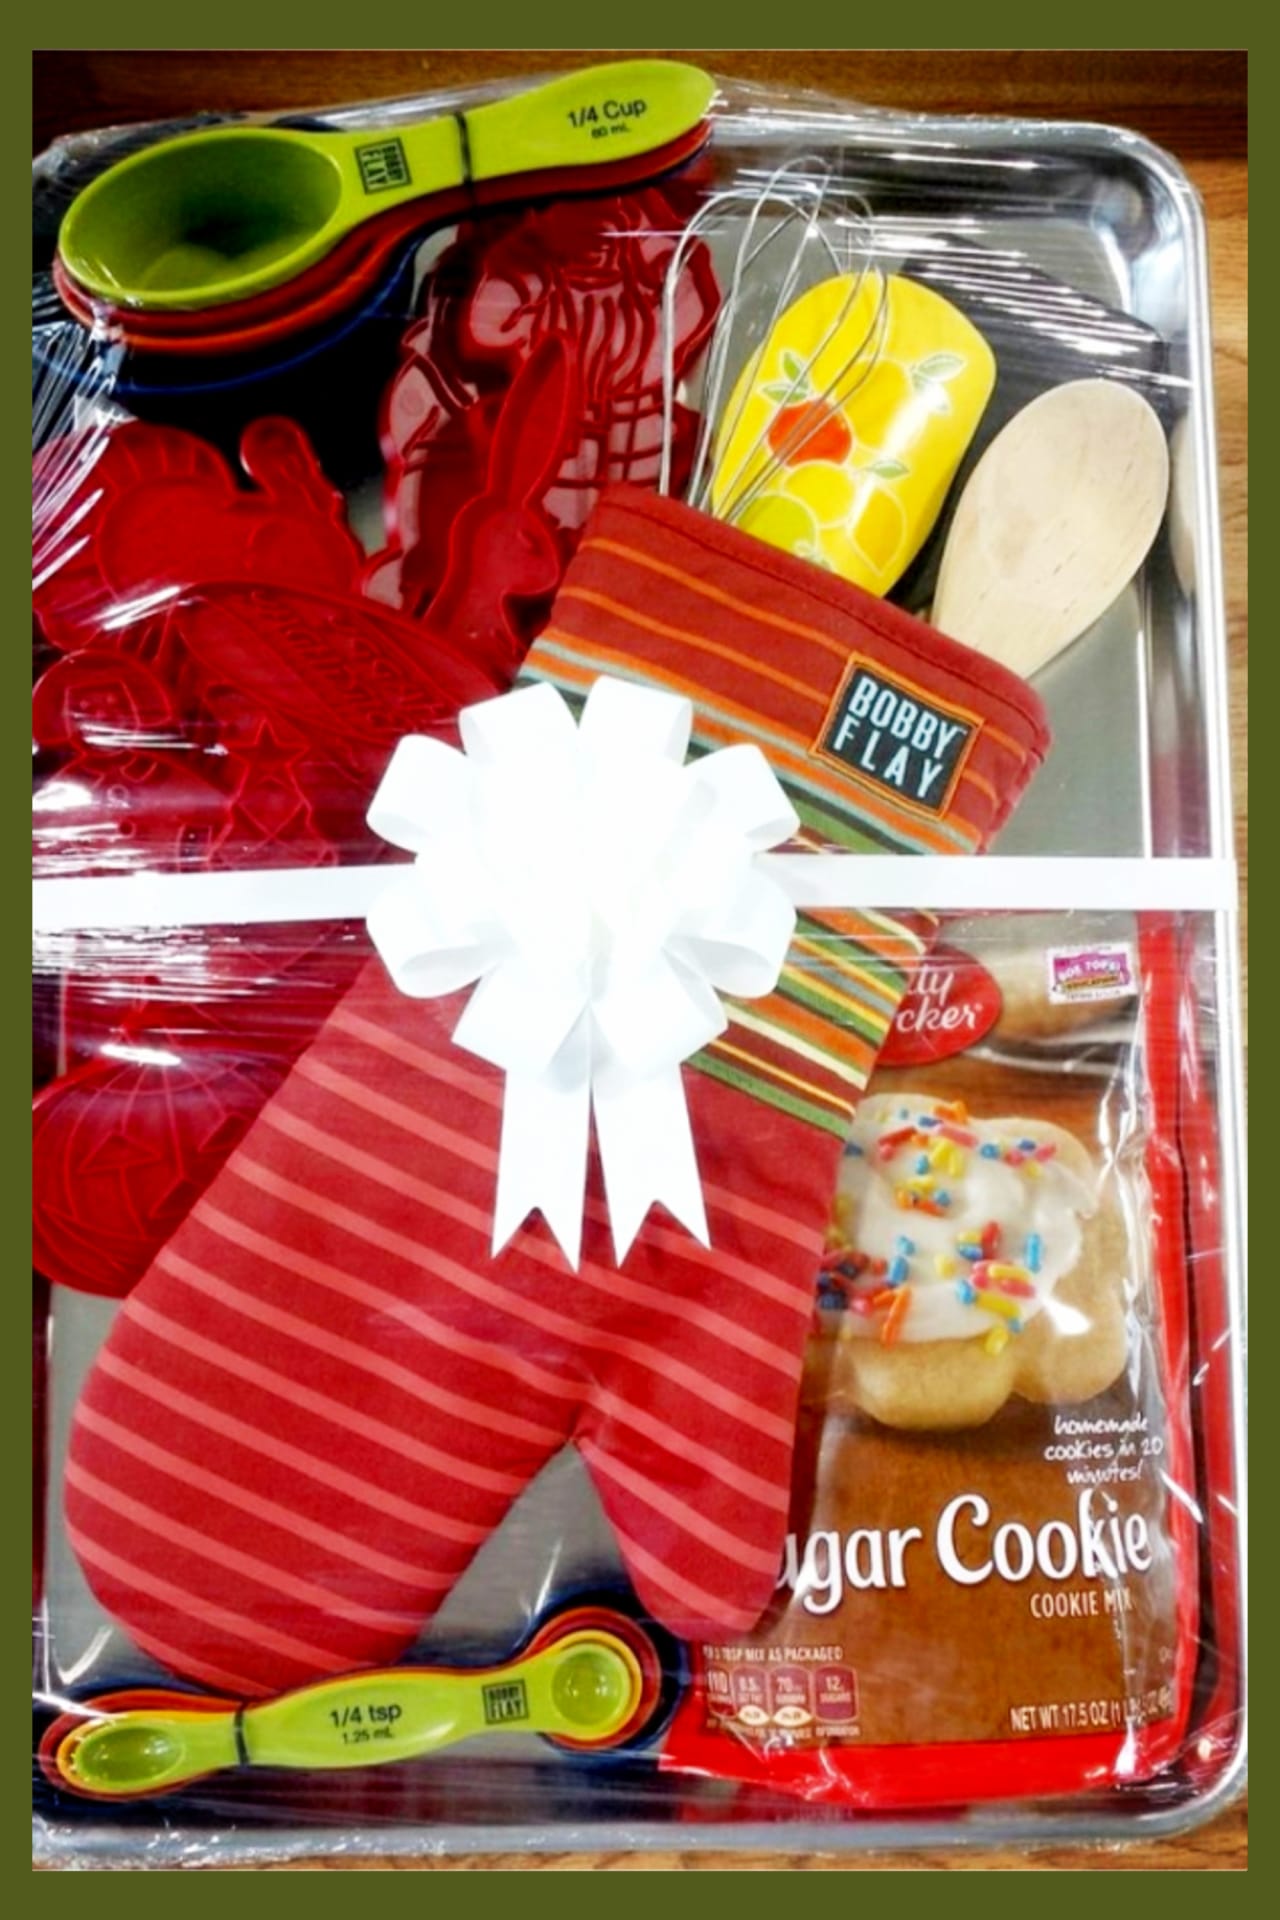 baking gift basket ideas - great and EASY housewarming gift basket ideas.  Raffle basket and silent auction gift basket ideas too